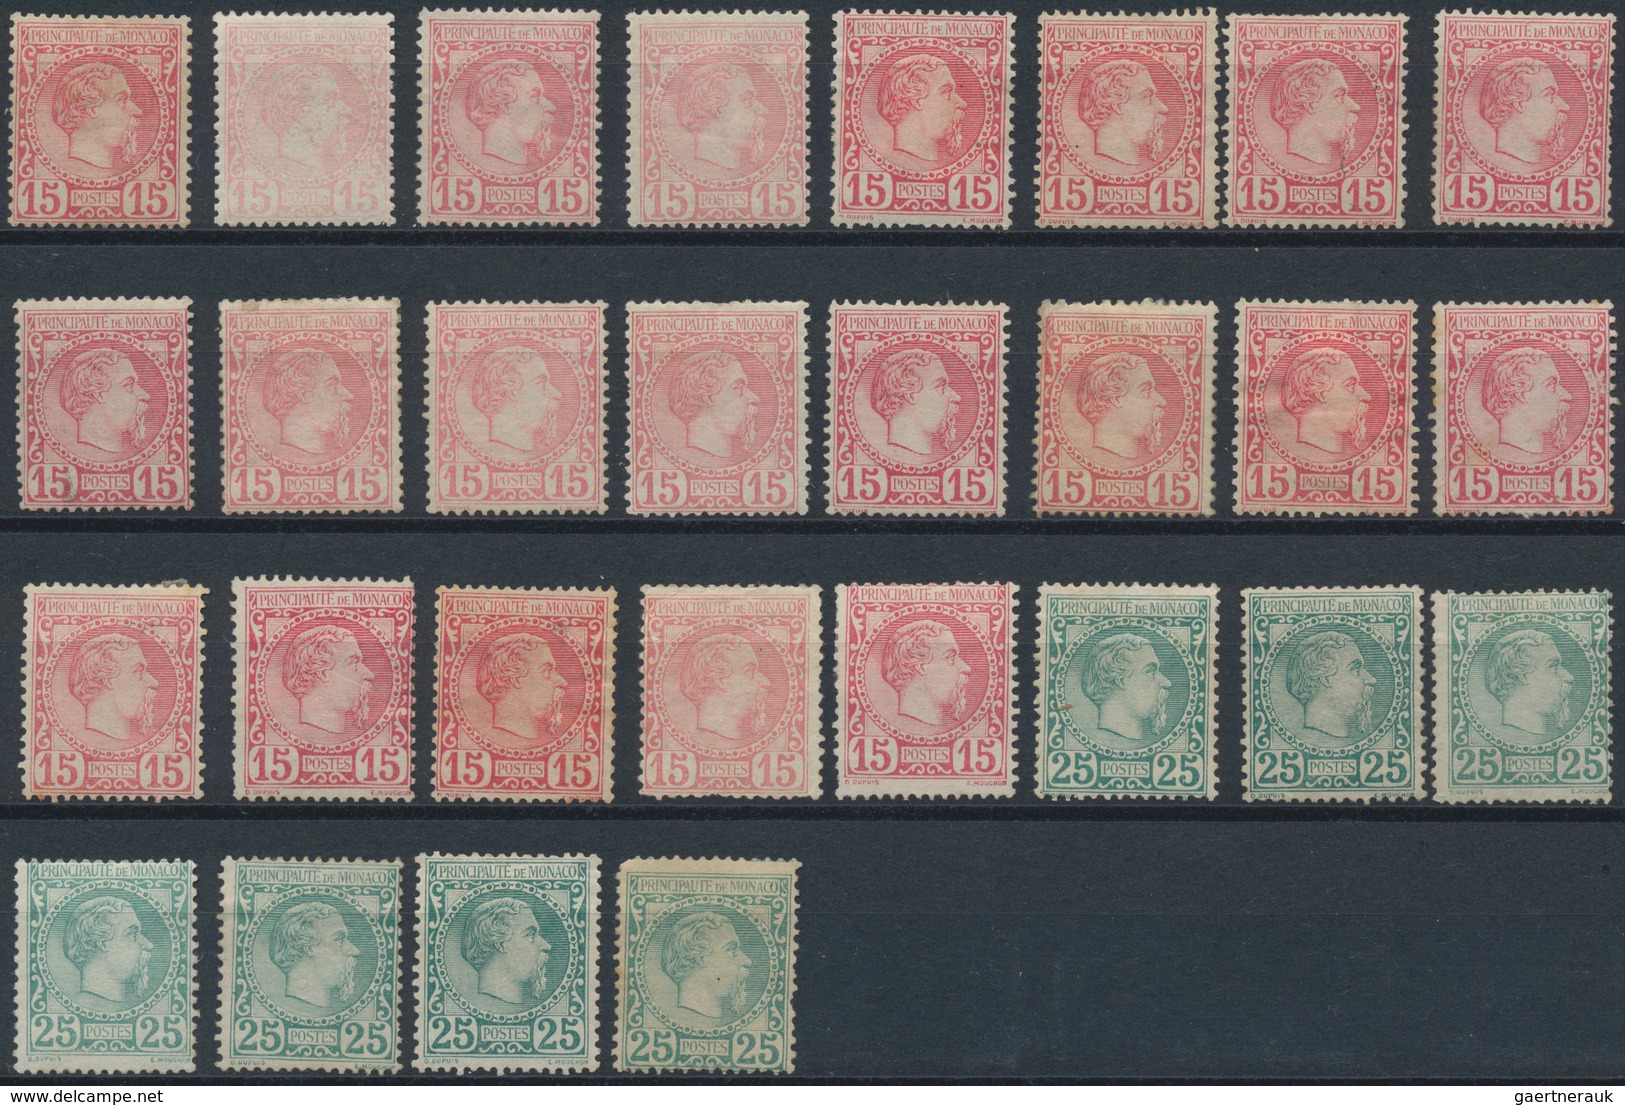 Monaco: 1885/1921, A Splendid Mint Accumulation Of Apprx. 400 Stamps, Well Sorted Incl. Shades, Mult - Gebraucht